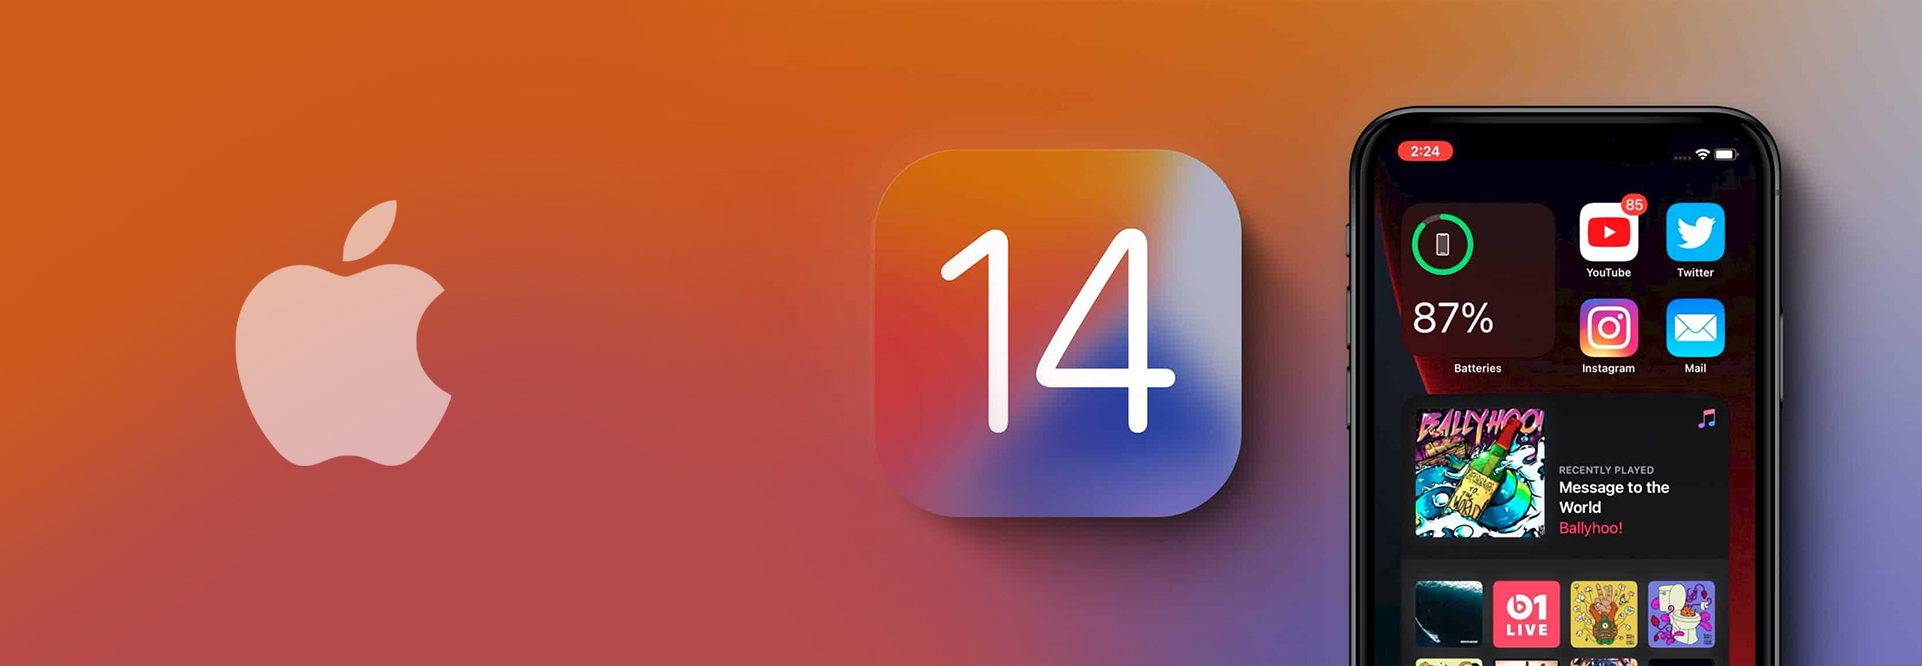 Top 10 Features of Apple iOS 14